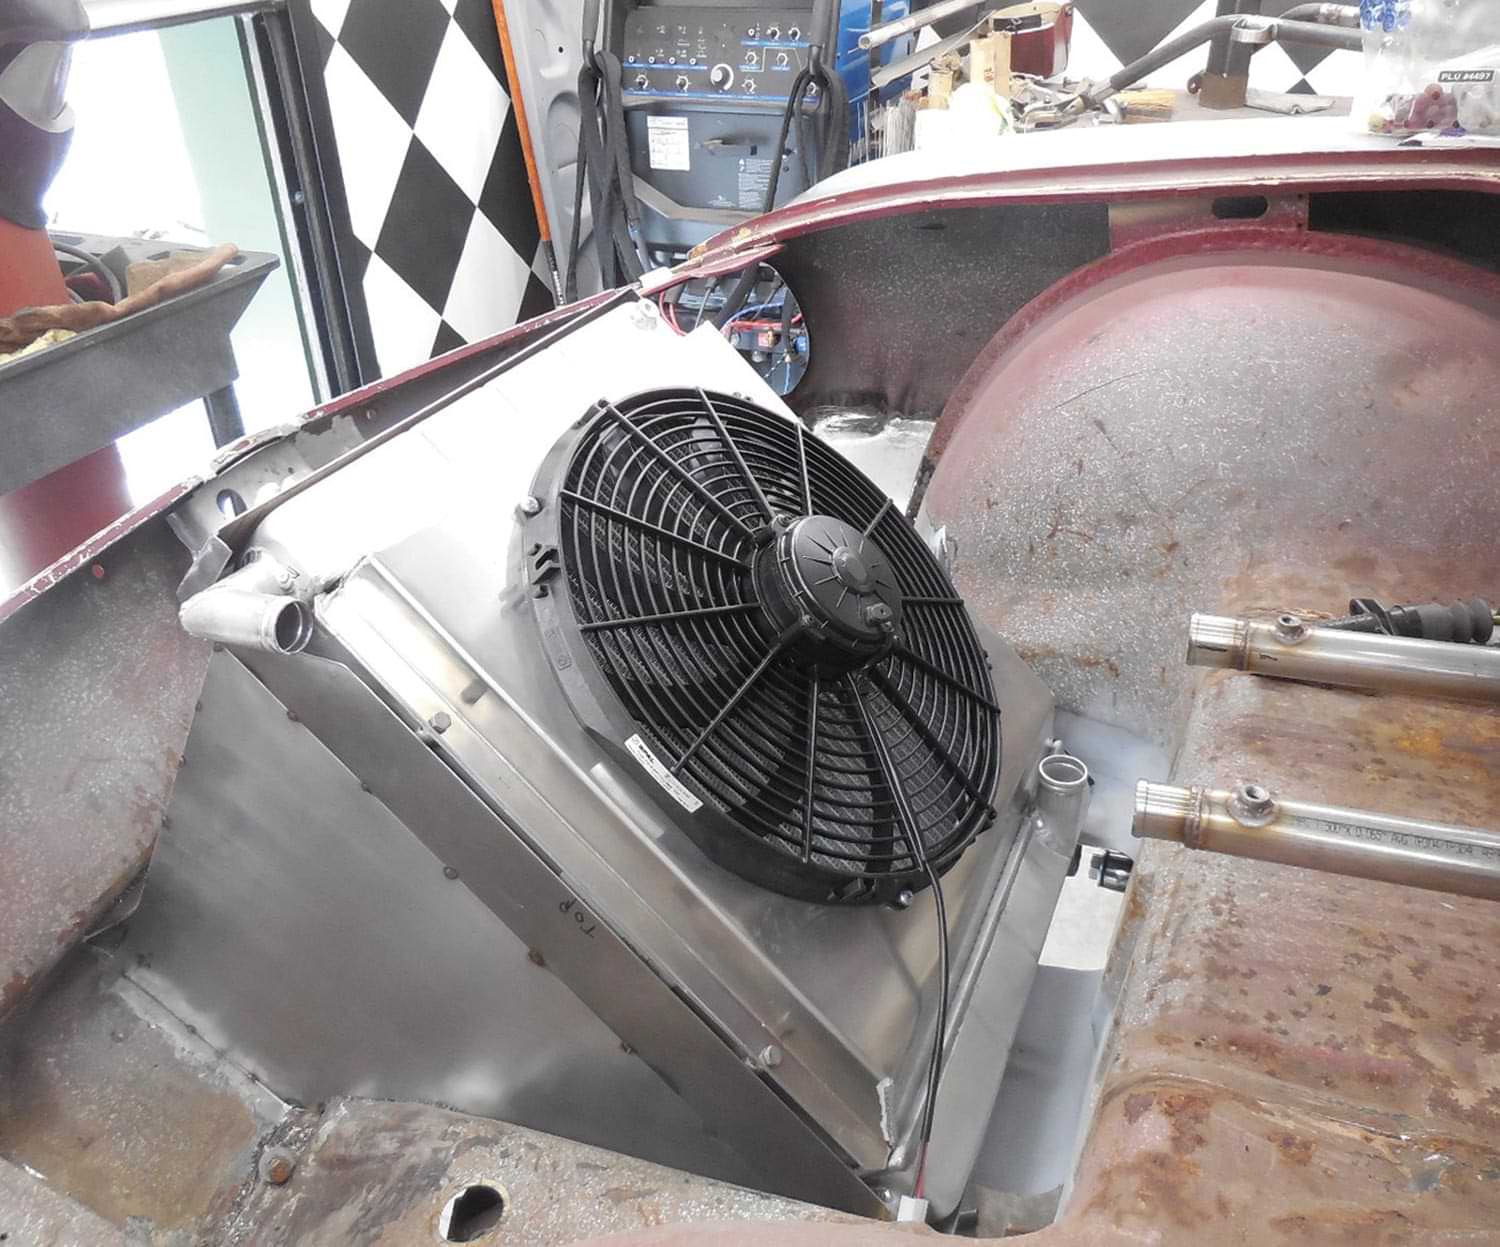 a radiator with the same dimensions that would be found in a Corvette is installed at an angle